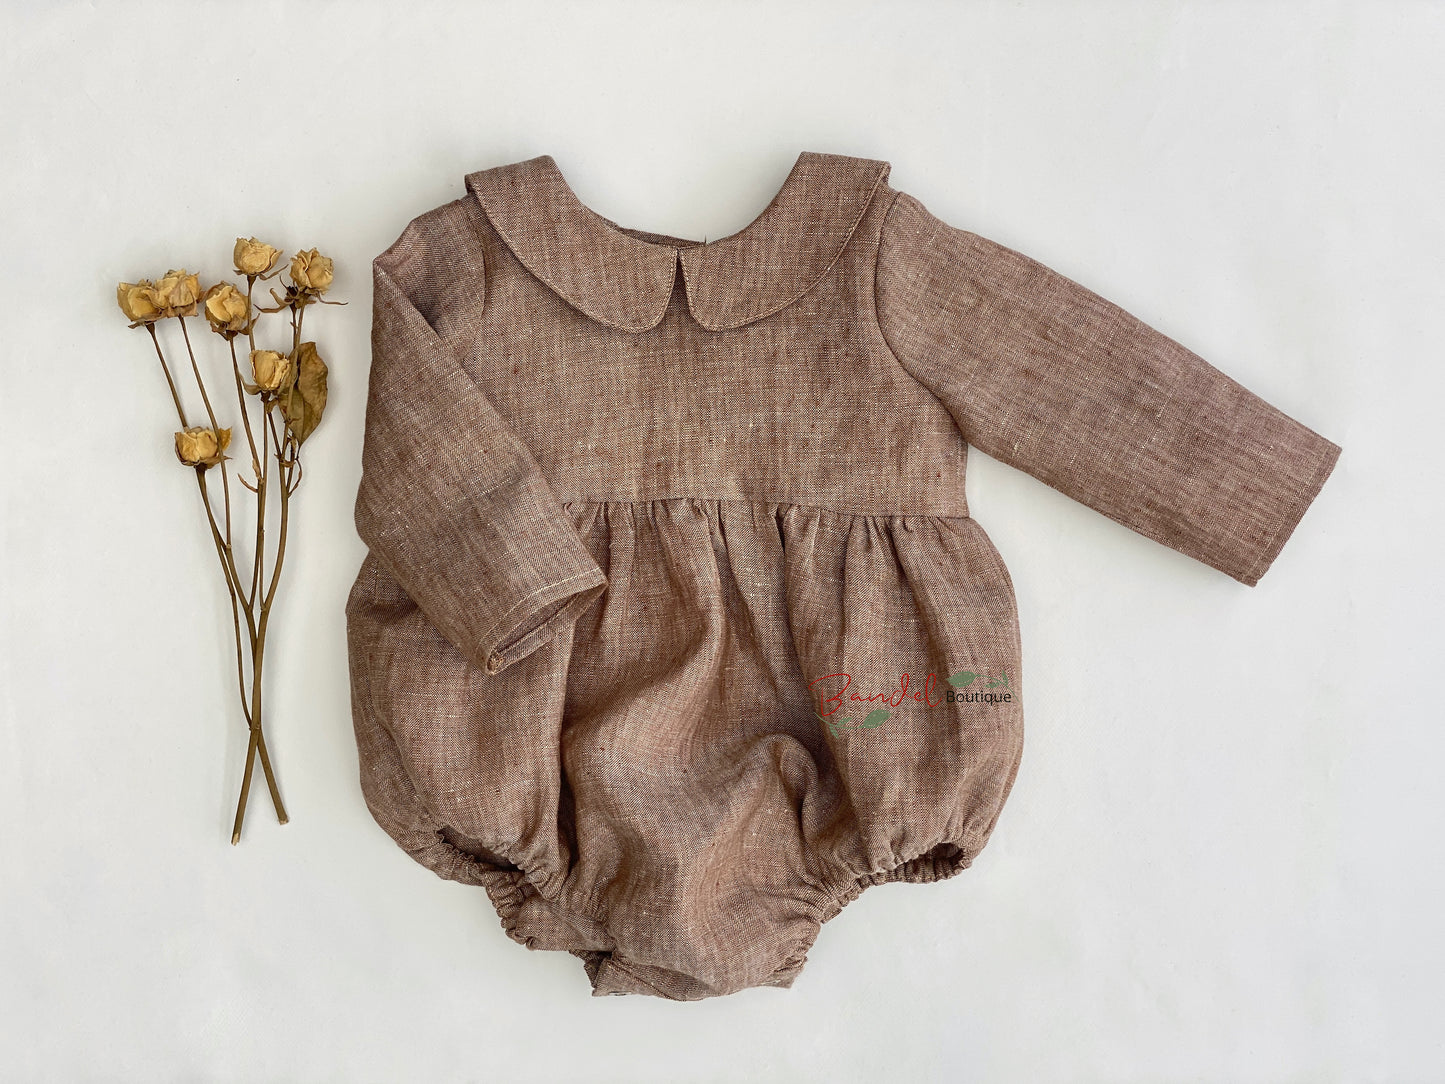 Classic Linen Playsuit in Brown is made of medium weight linen, perfectly combining comfort and style for your baby. It features a Peter Pan collar, long sleeves, and elastic at the legs to ensure a snug fit. Wooden buttons and snaps at the back and crotch make changing your little one effortless.